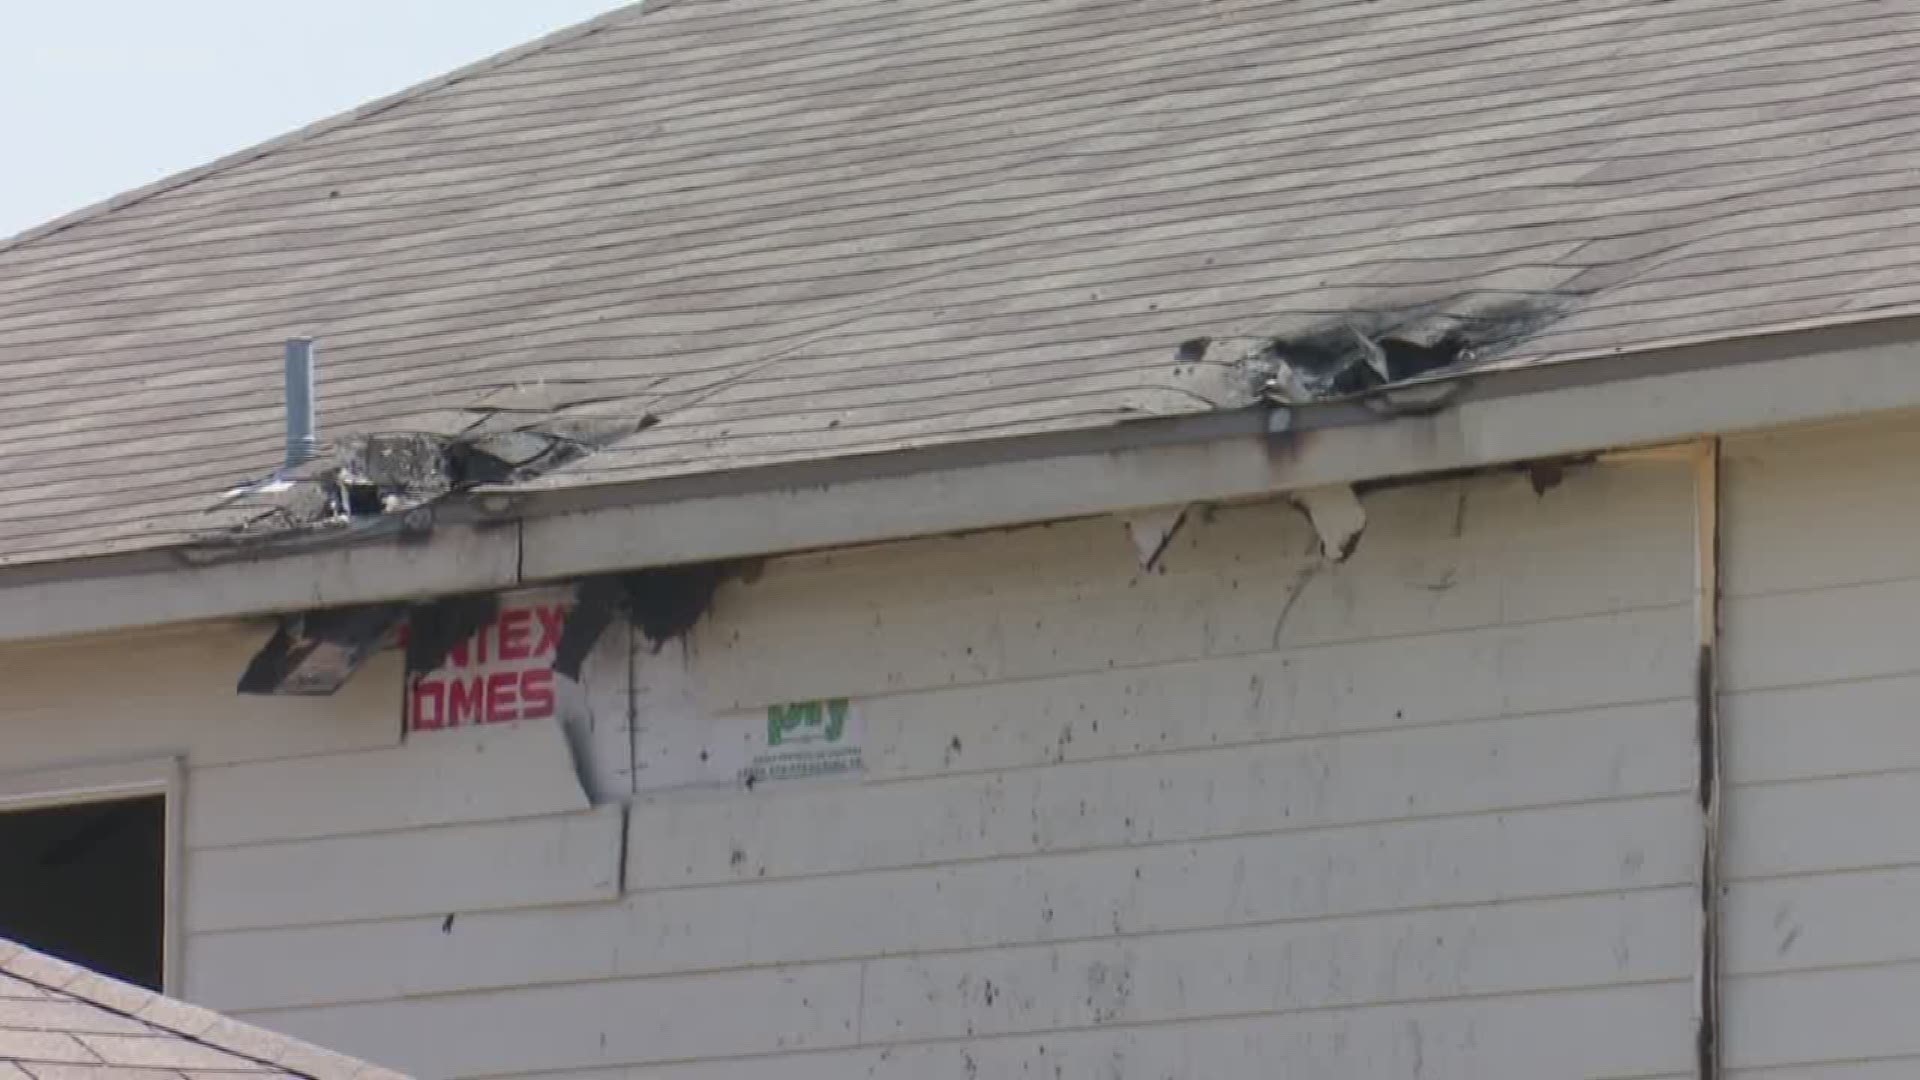 When a booming thunder clap shook the Benitez Family out of their sleep early today in west Bexar County, they thought lightning hit nearby. But then, they smelled smoke. Eyewitness News reporter Sue Calberg explains what happened next.